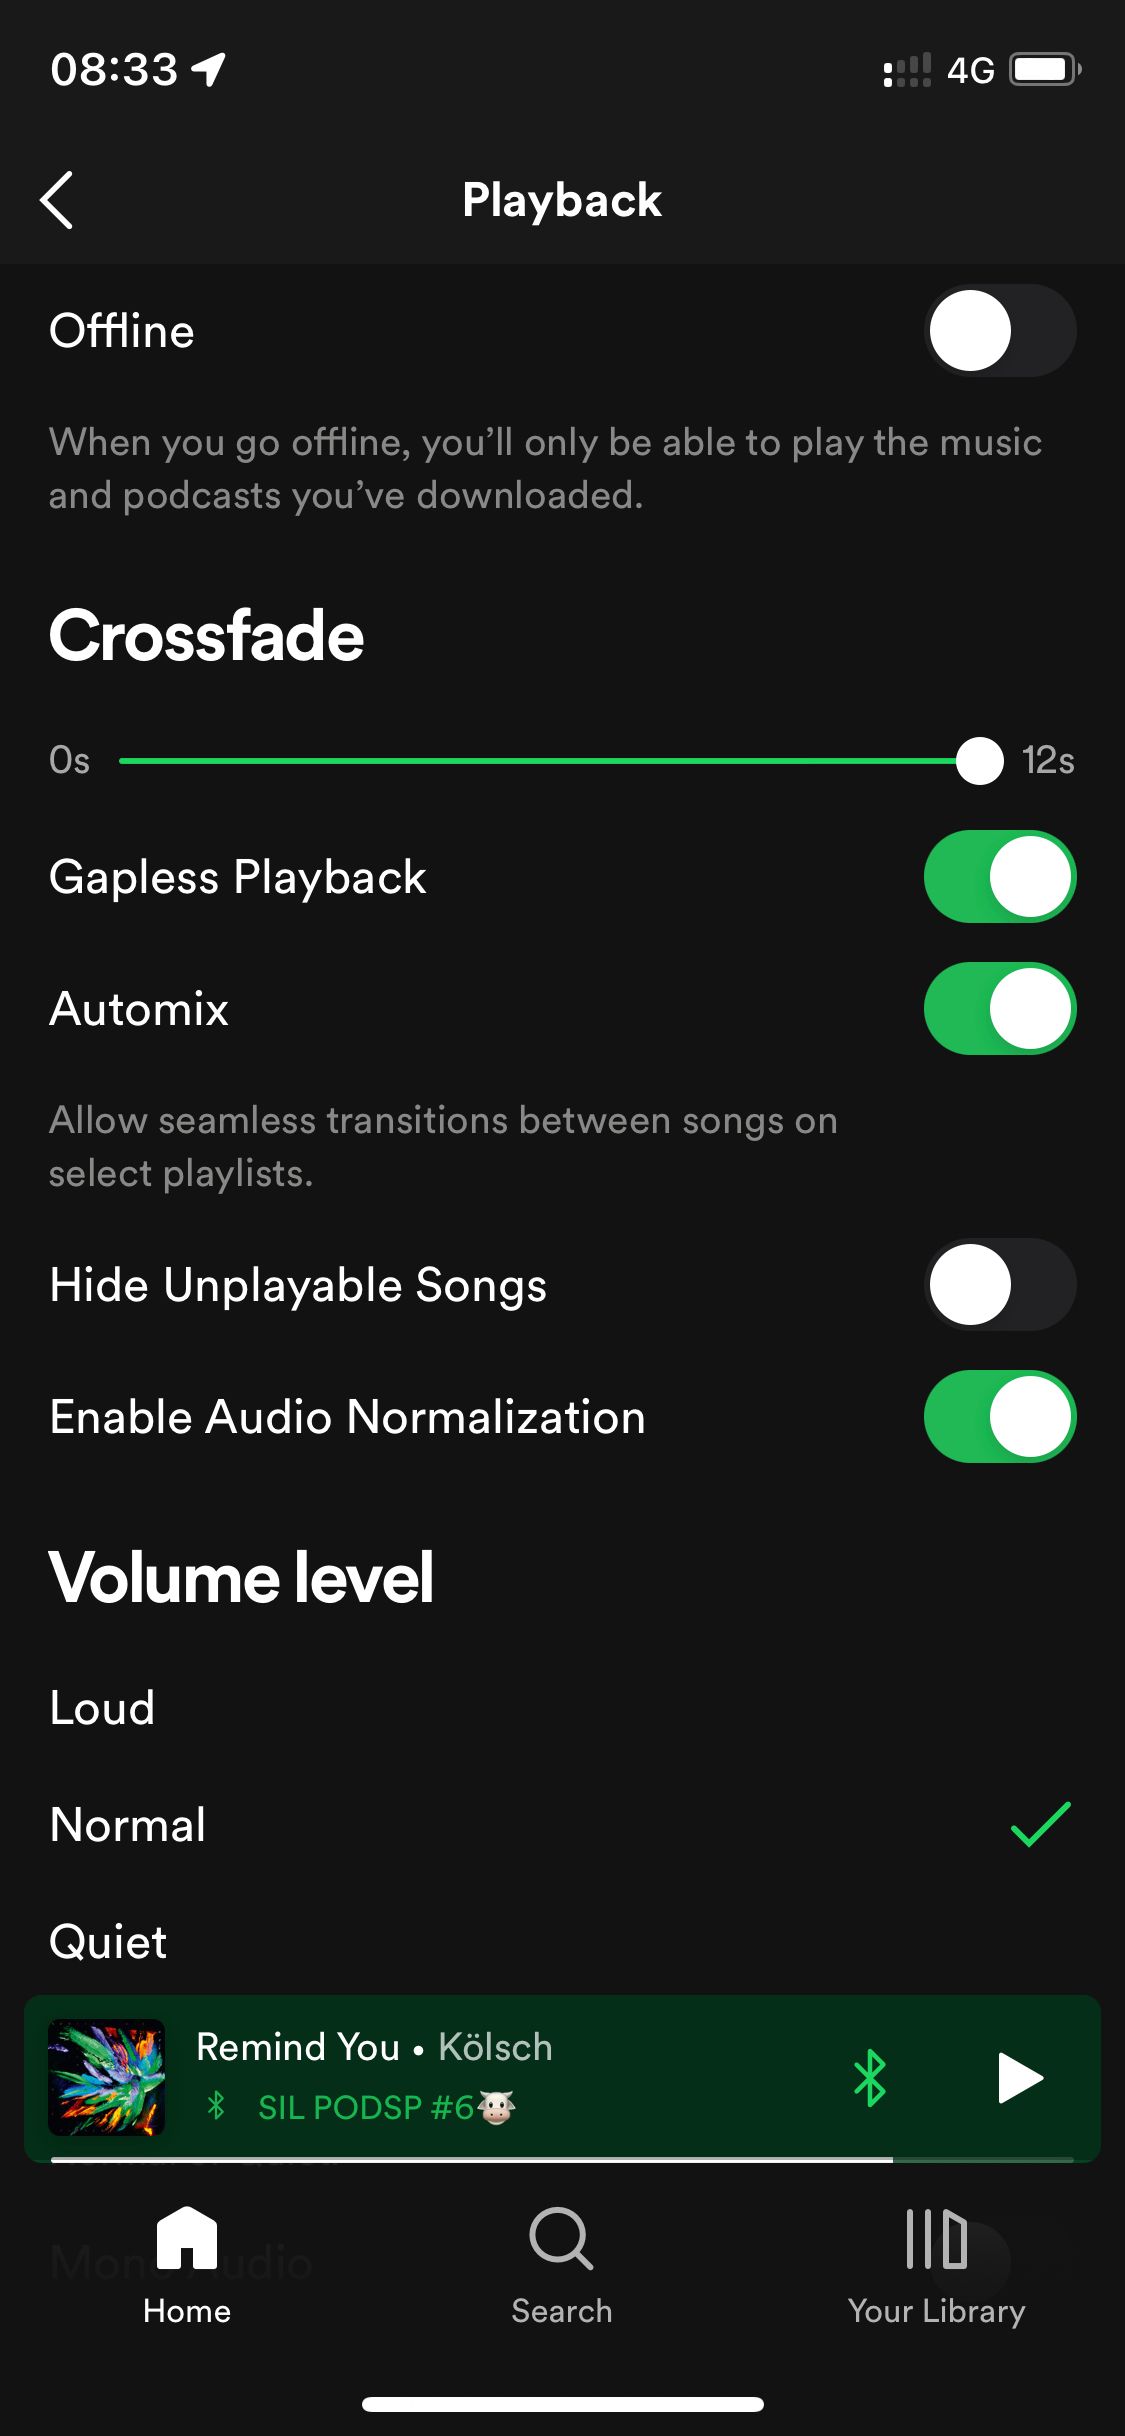 Missing Crossfade and Automix options on iOS - Page 2 - The Spotify ...